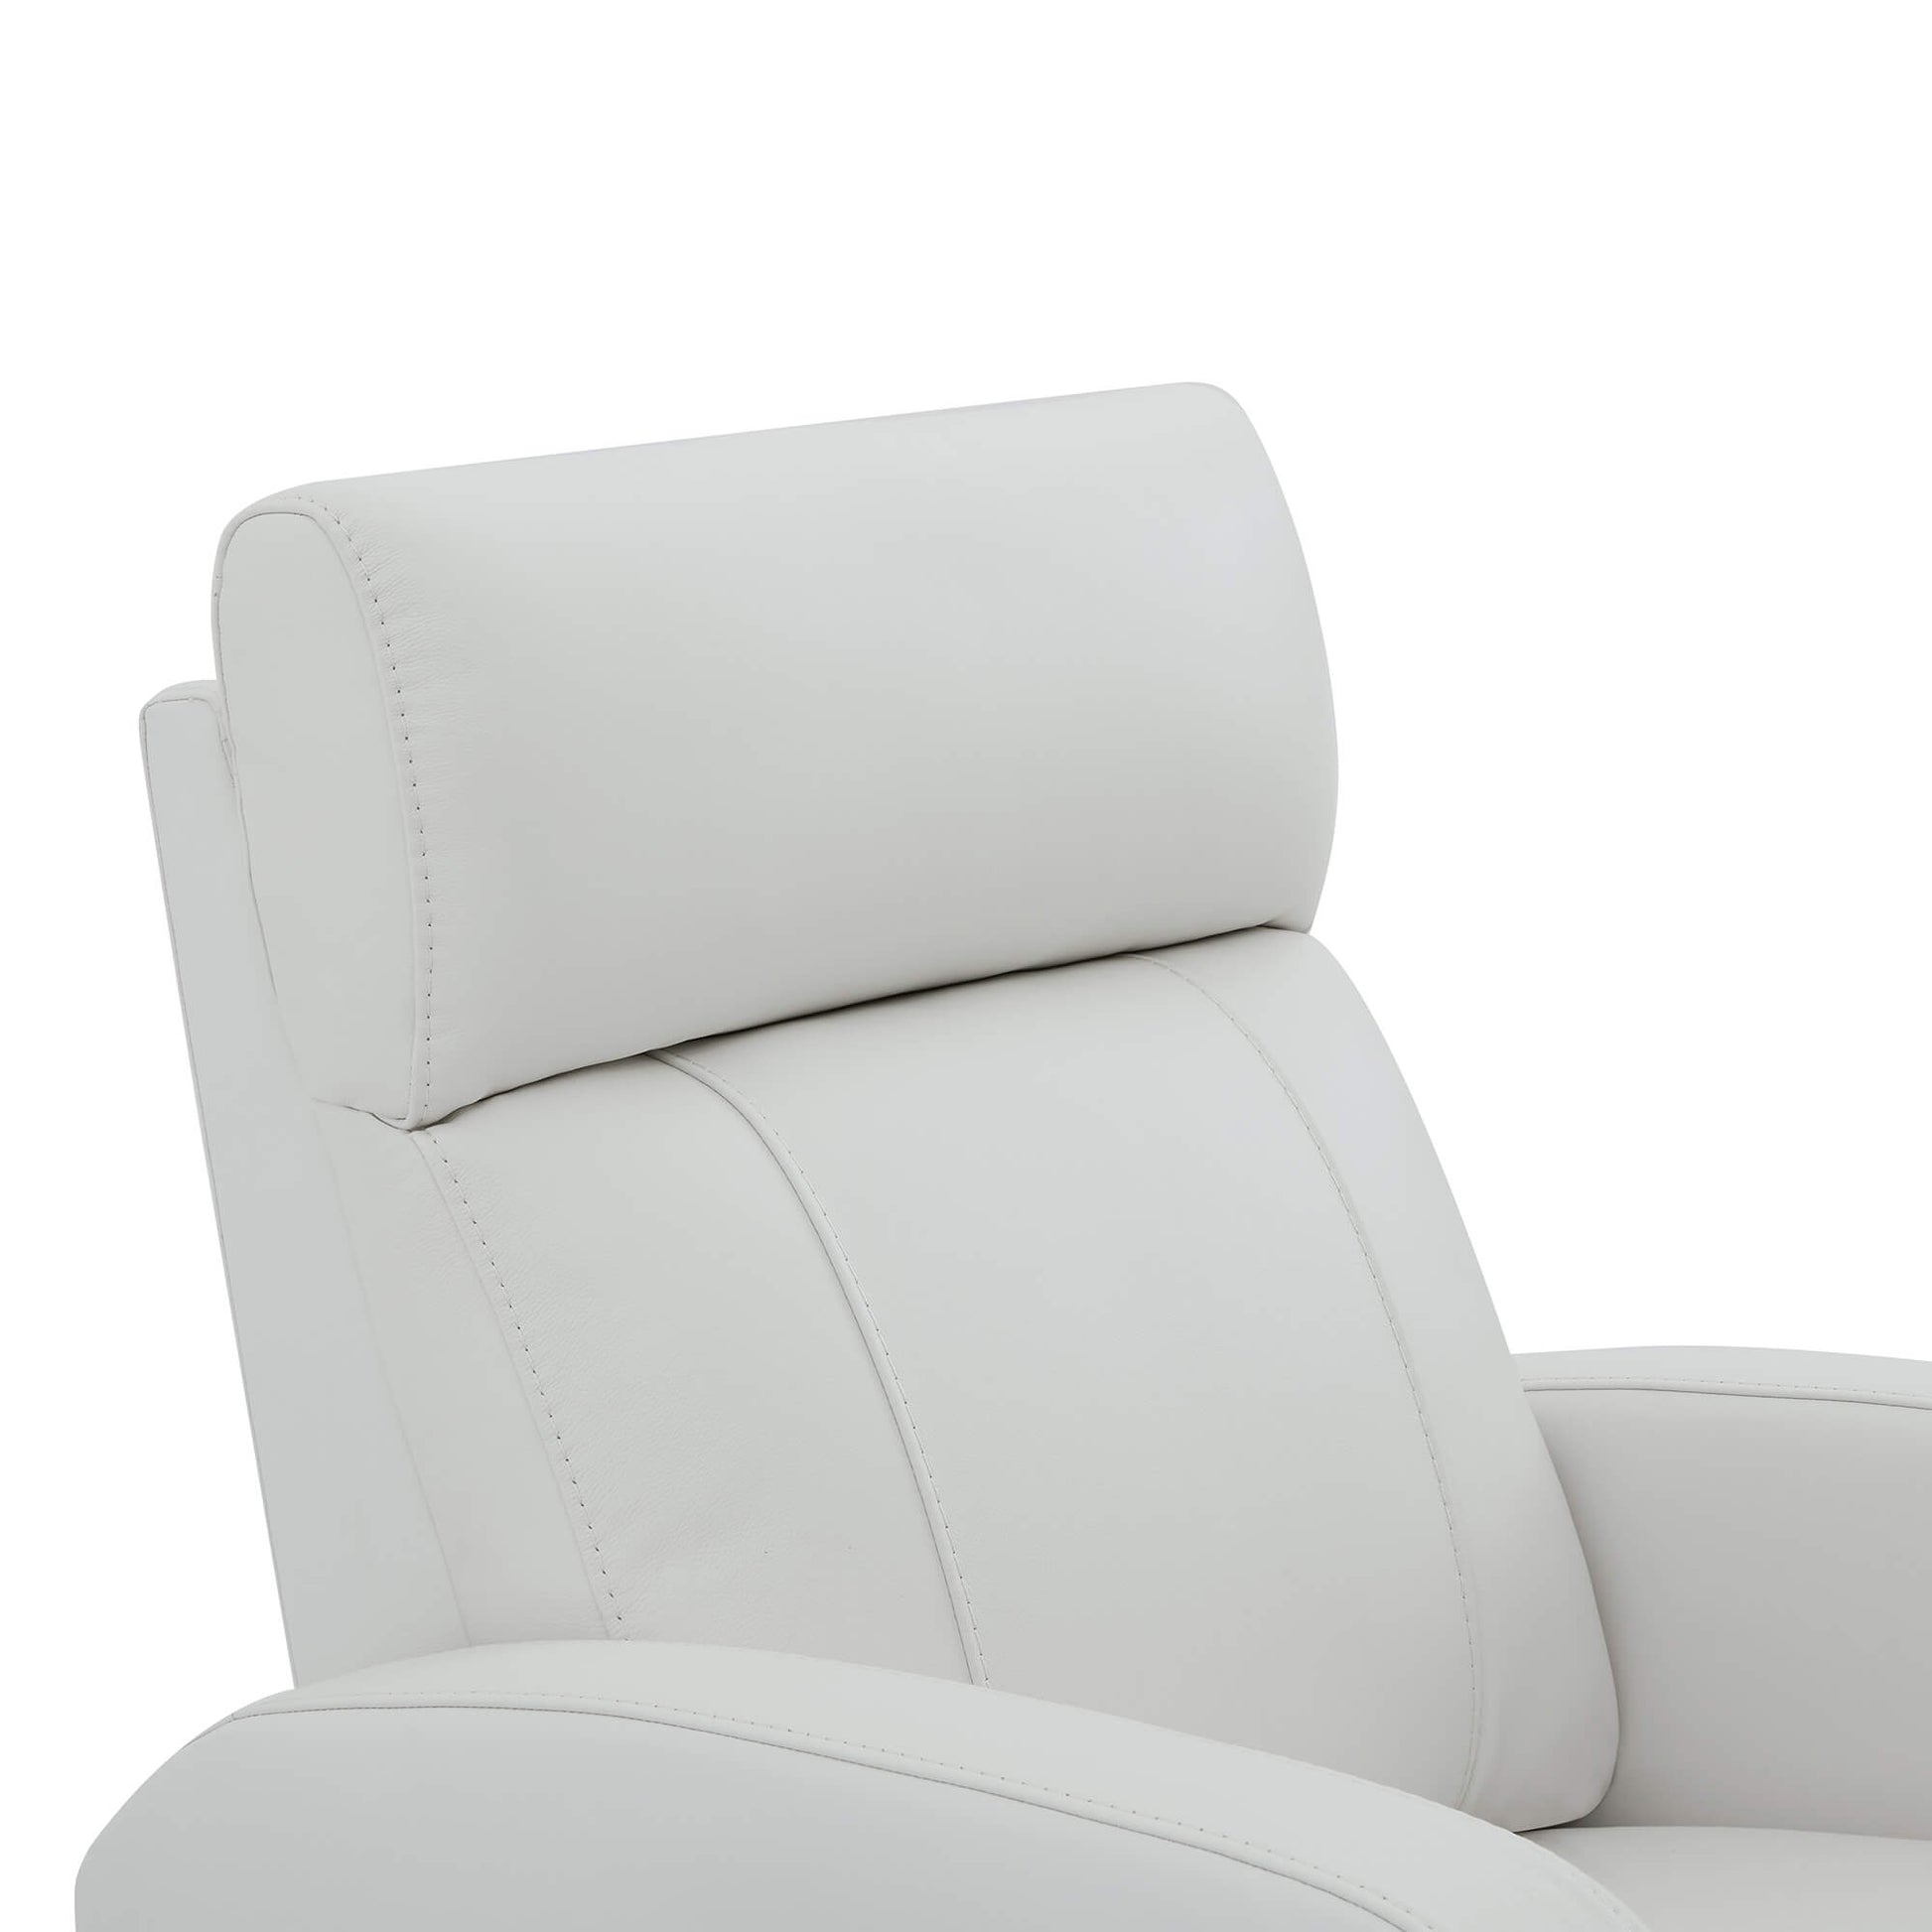 CHITA LIVING-Joy Power Swivel Recliner with Manual Headrest-Recliners-Genuine Leather-White-